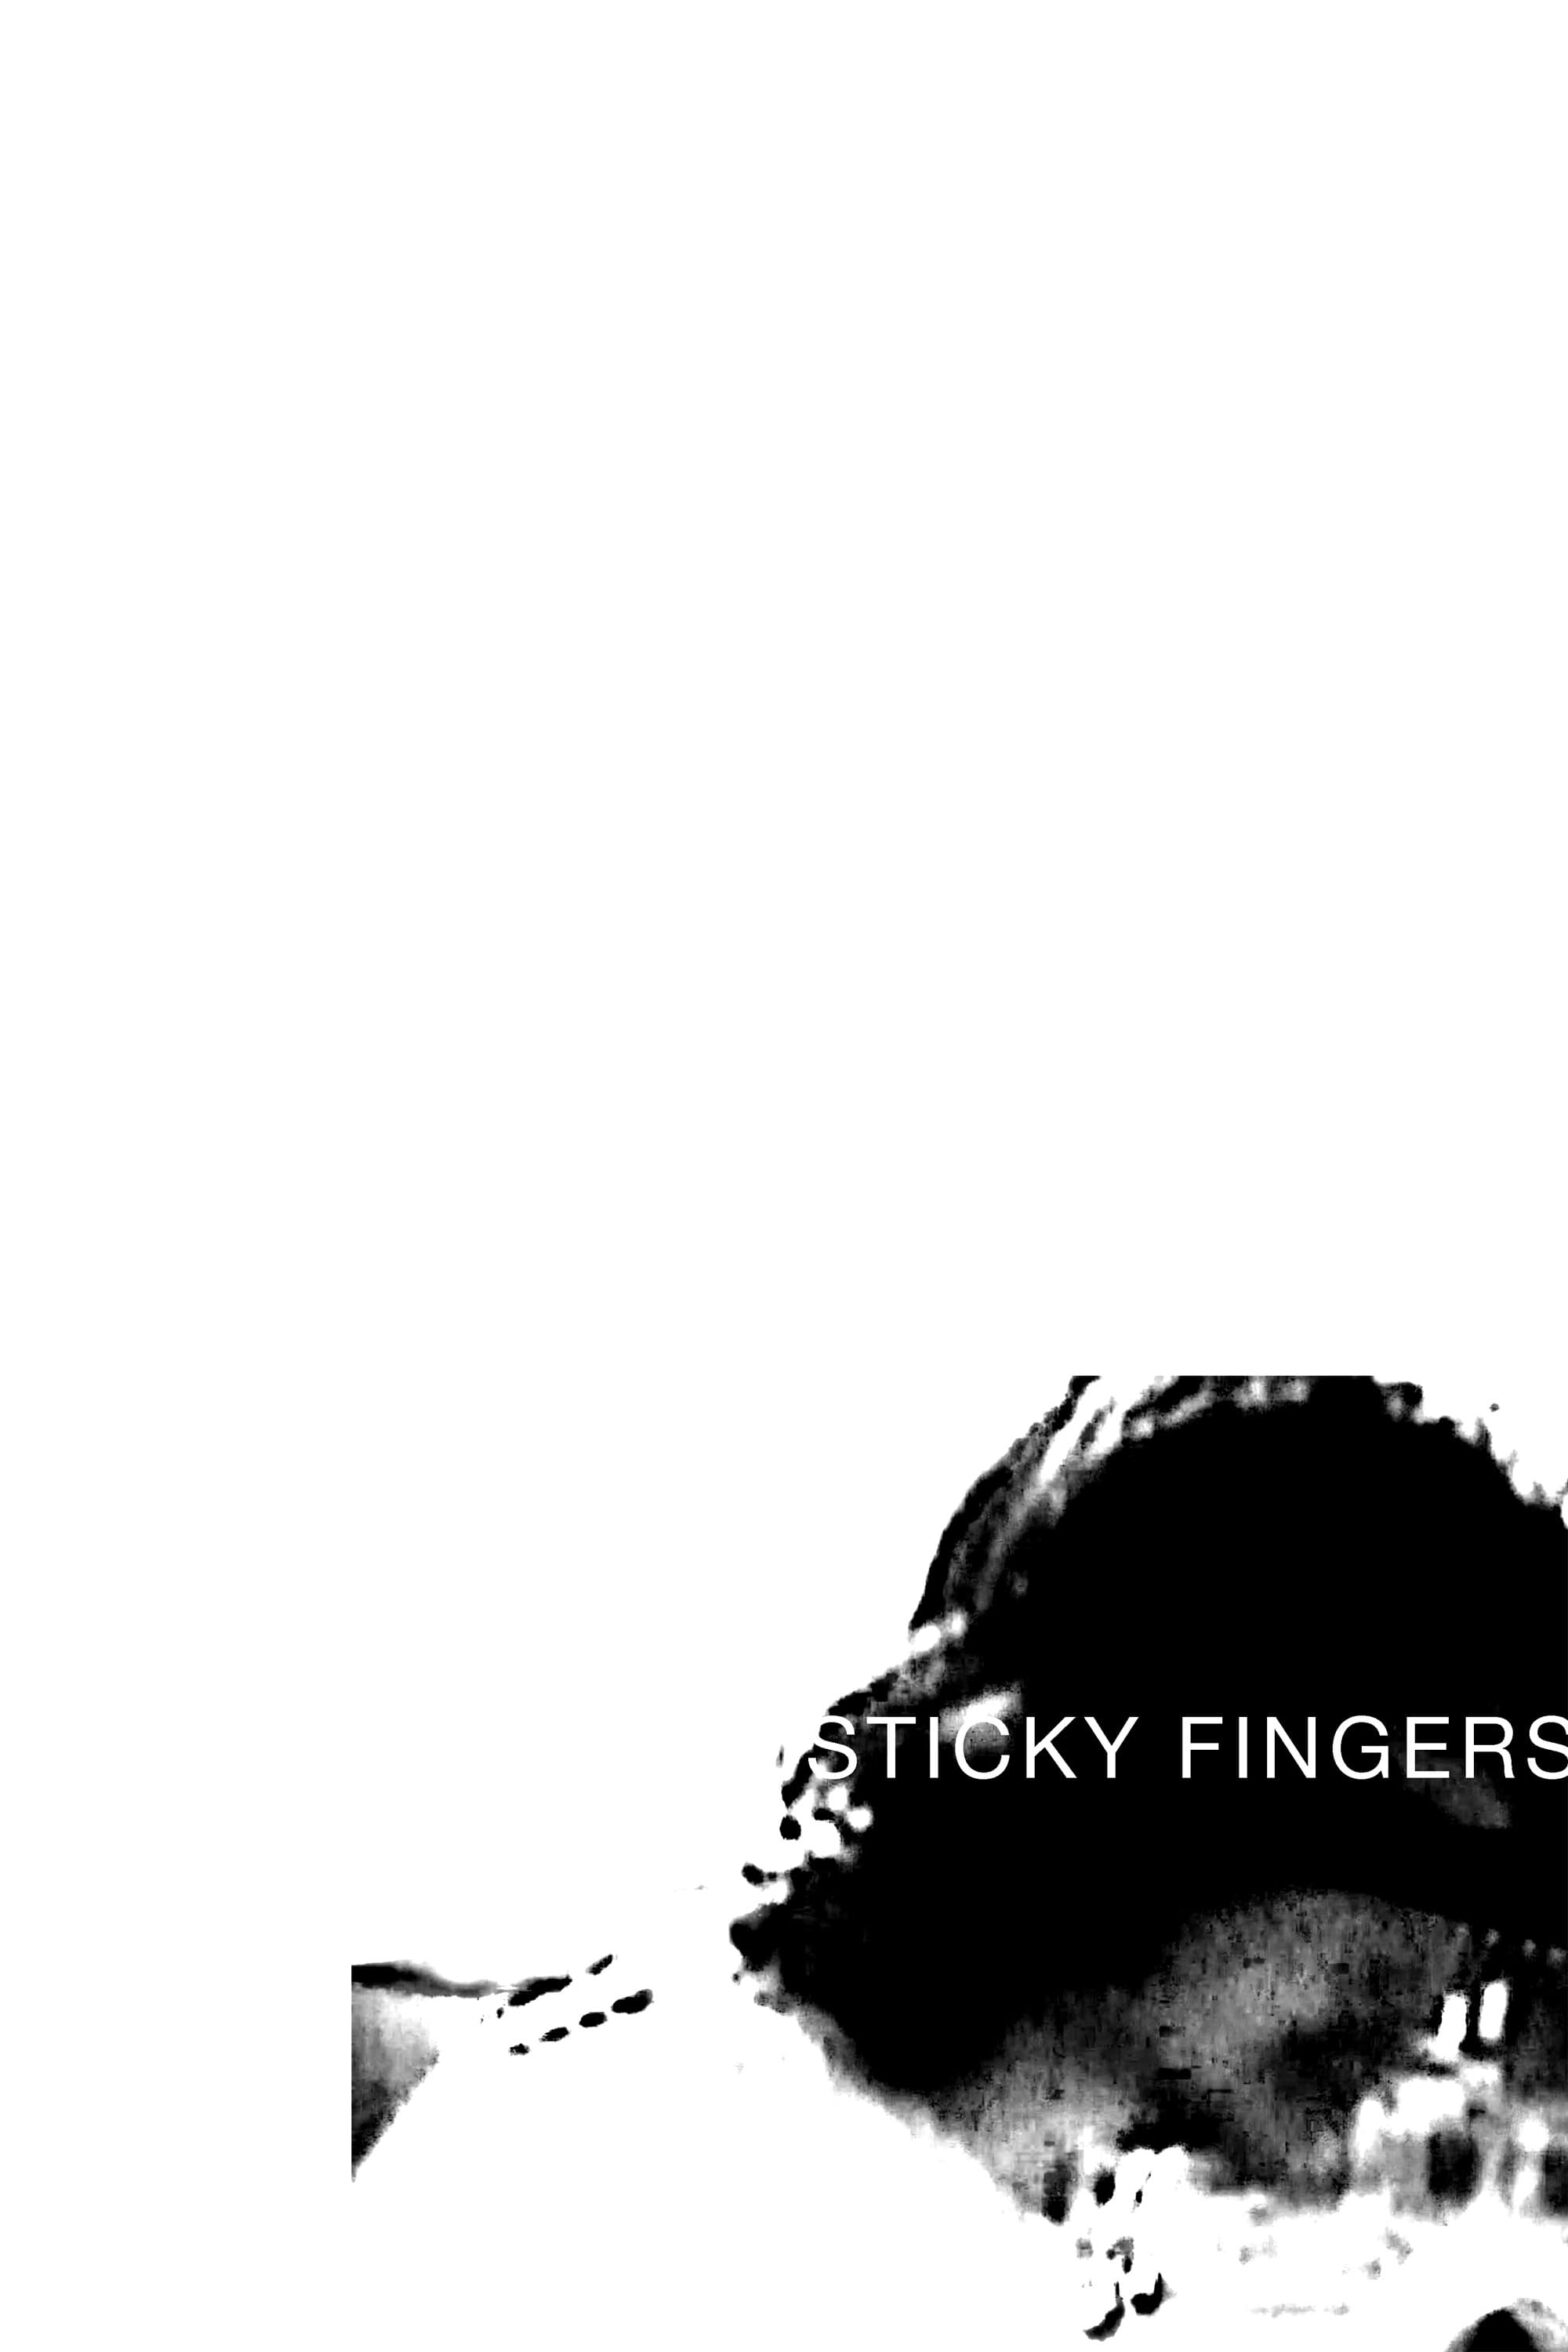 Poster for the movie "Sticky Fingers"